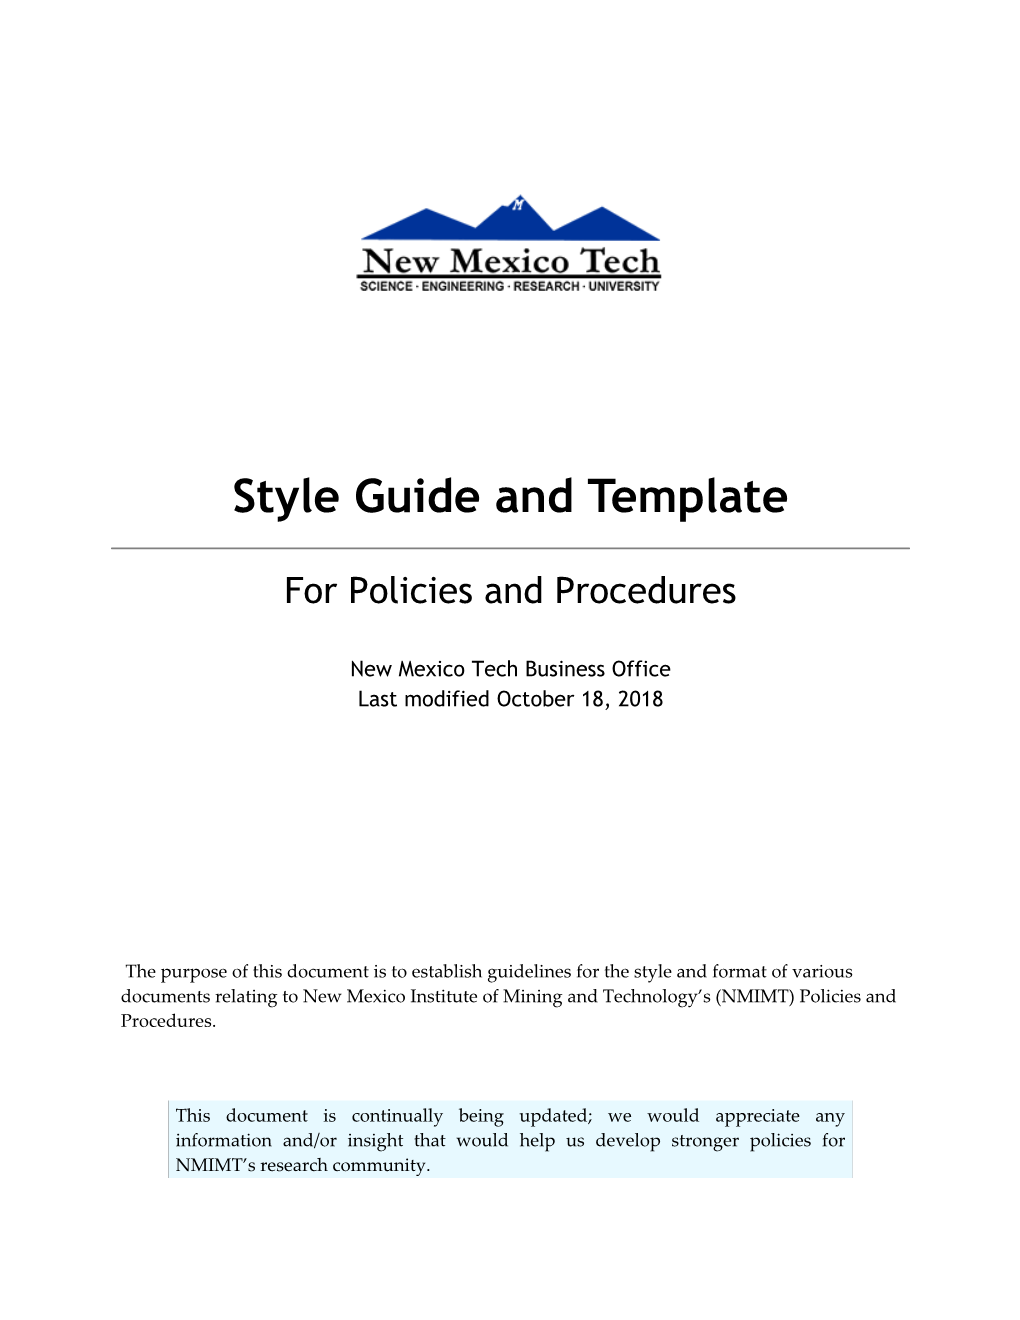 Style Guide and Template for Policies and Procedureslast Revised: October 26, 2018